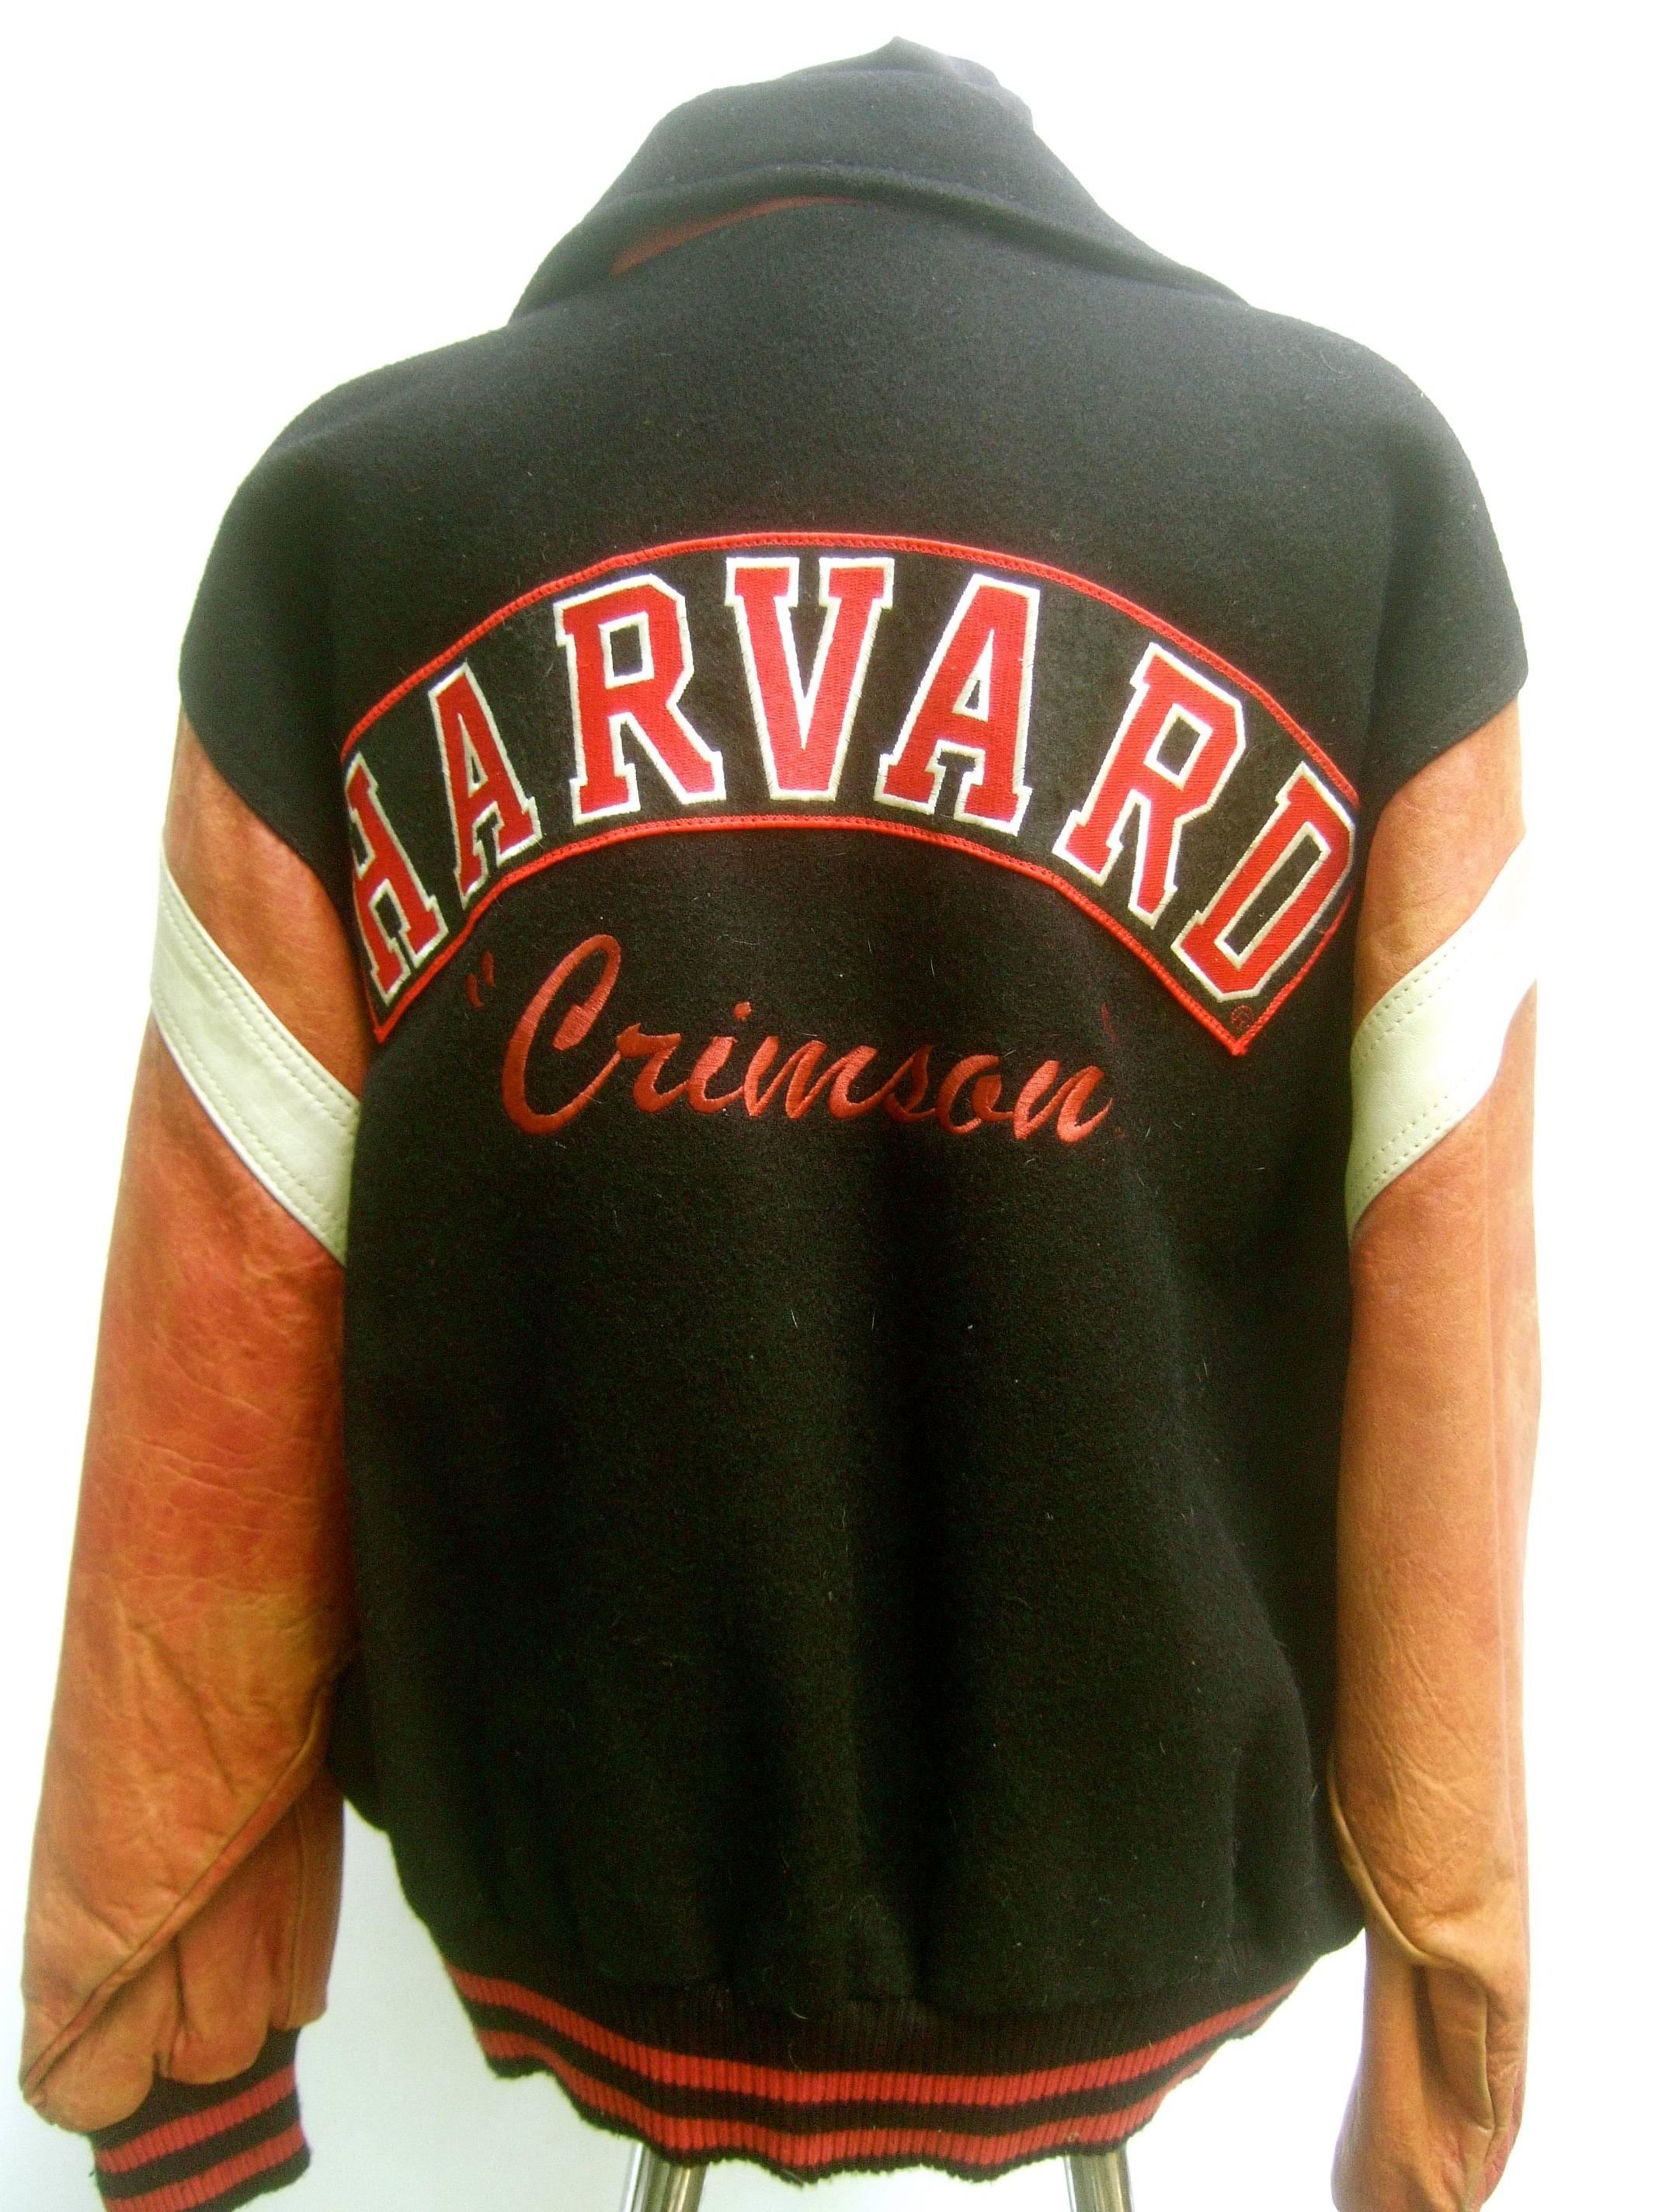 Harvard Leather and wool collegiate jacket ca 1980s
The backside of the black wool jacket has an
applique embroidered patch labeled Harvard
Underneath is embroidered Crimson in script 

The front of the black wool chest has an appliqué 
embroidered